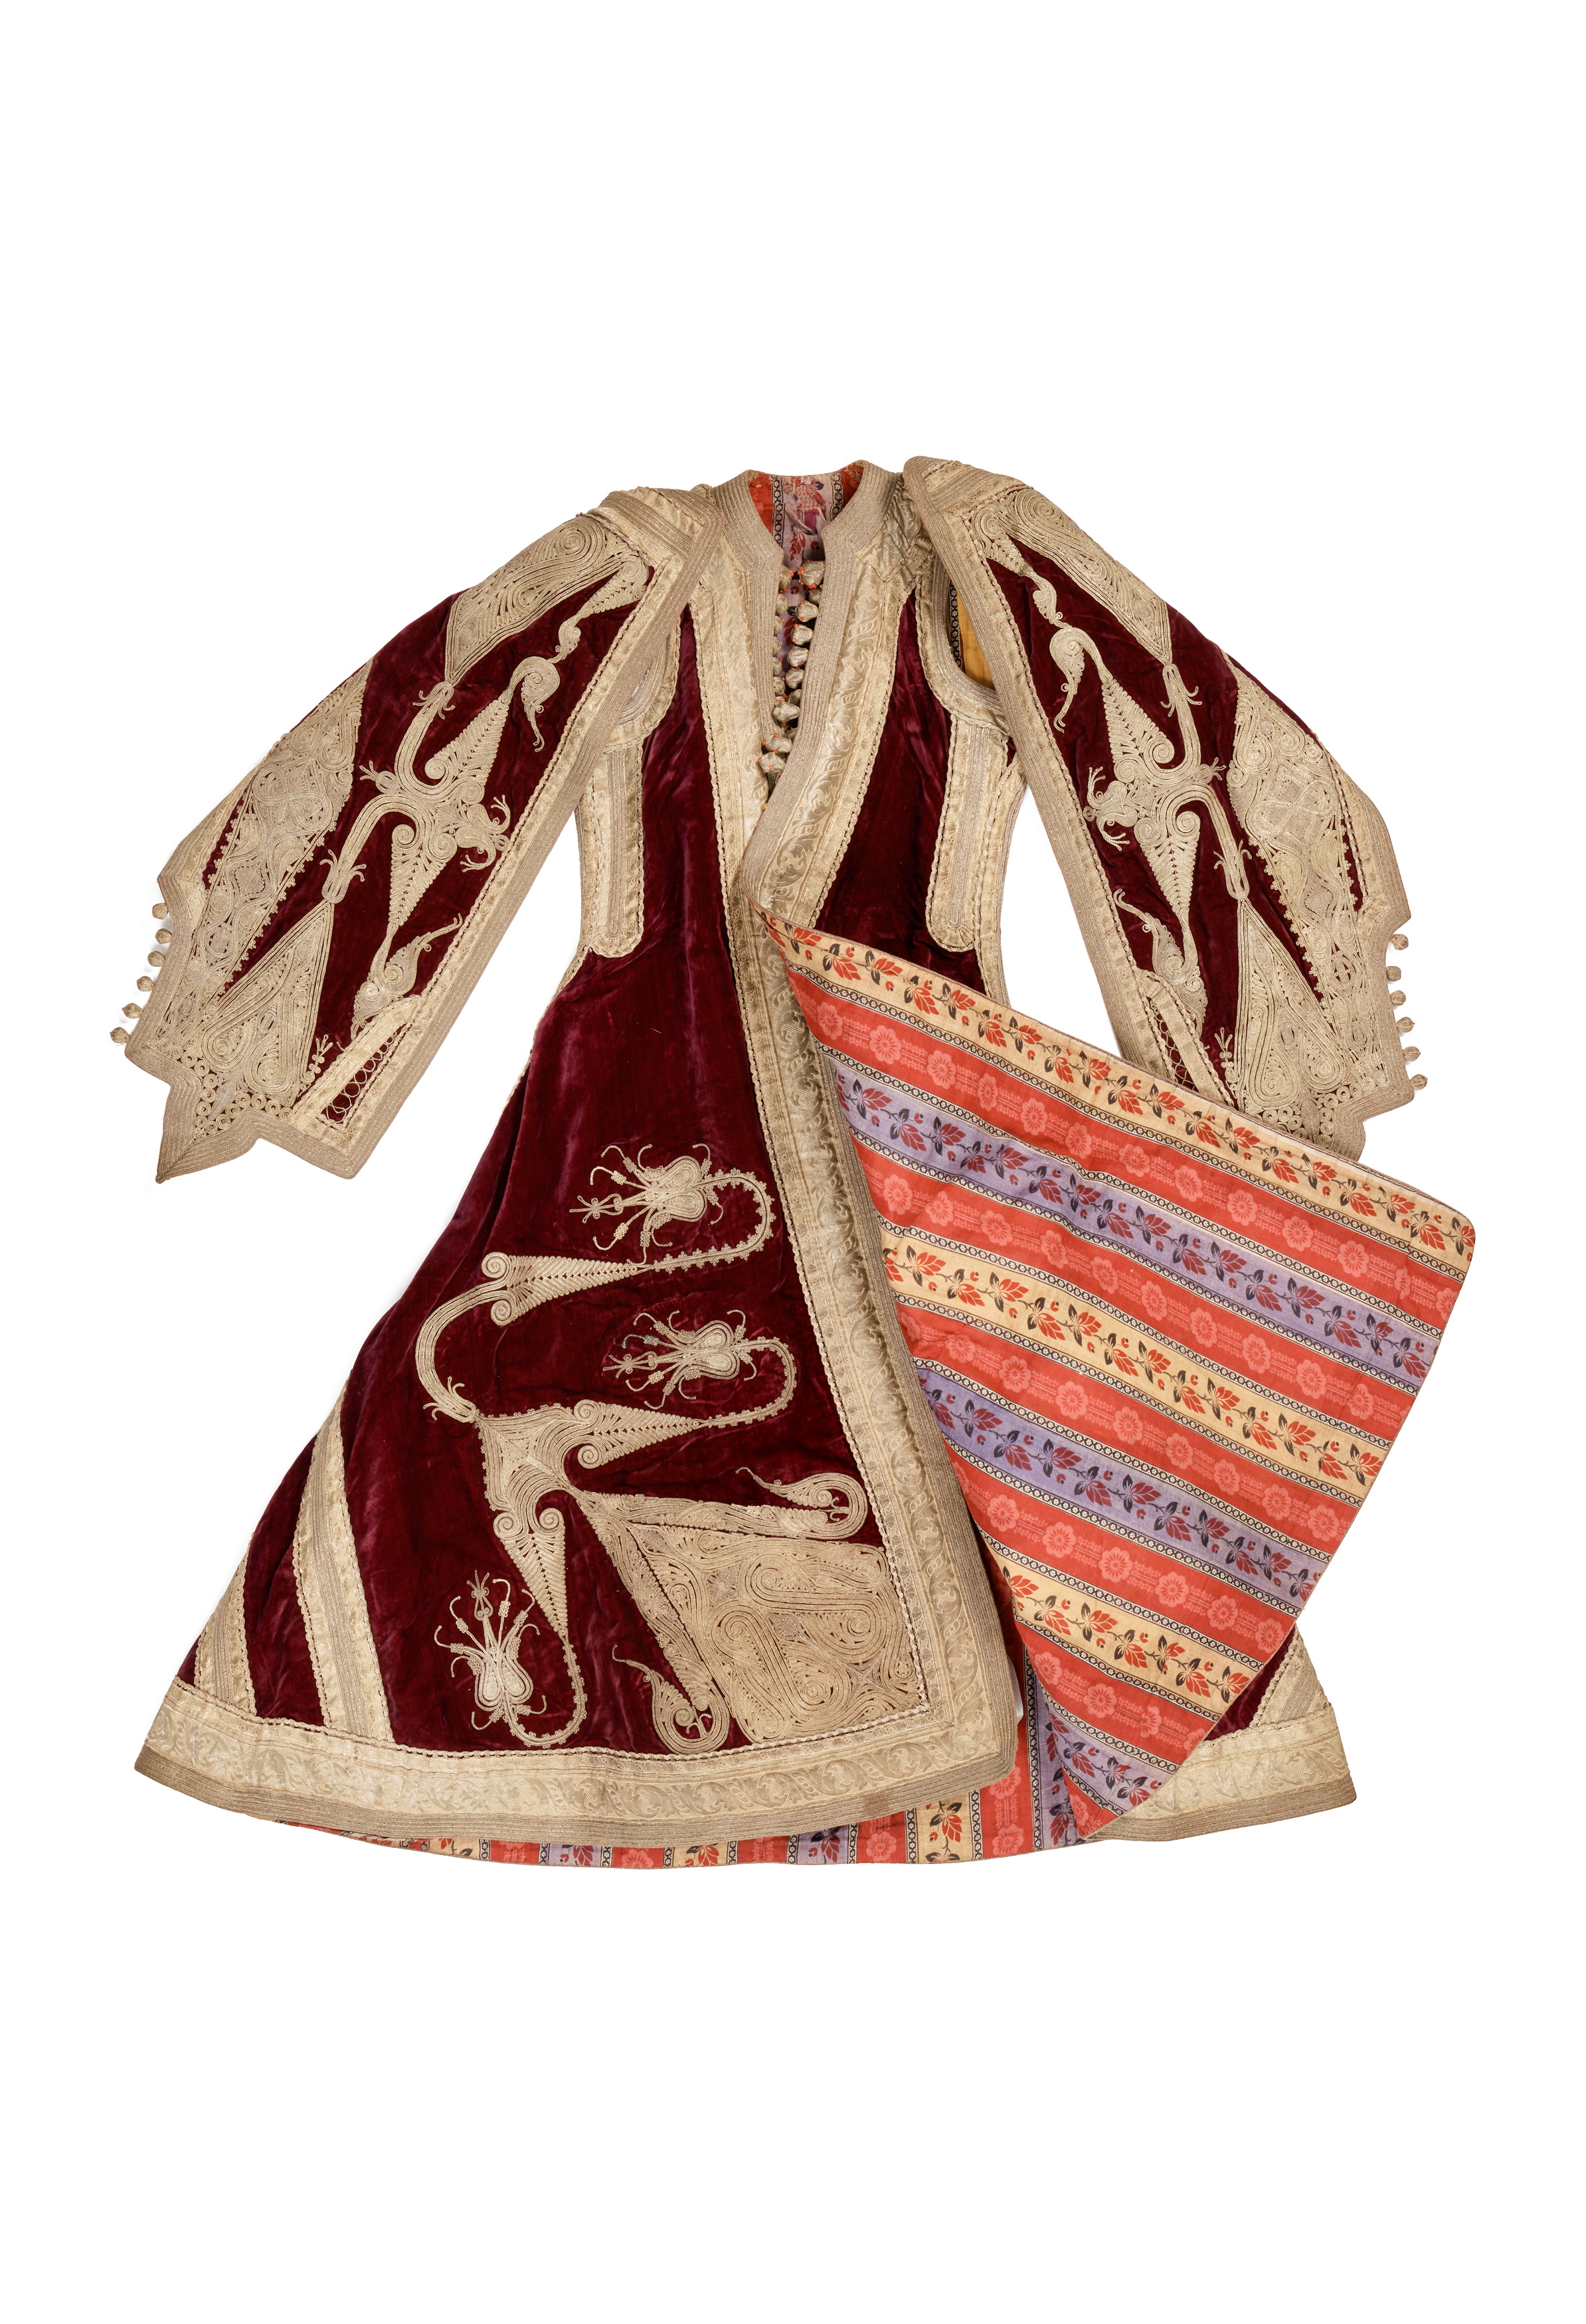 Sleeveless fitted coat from Central Serbia